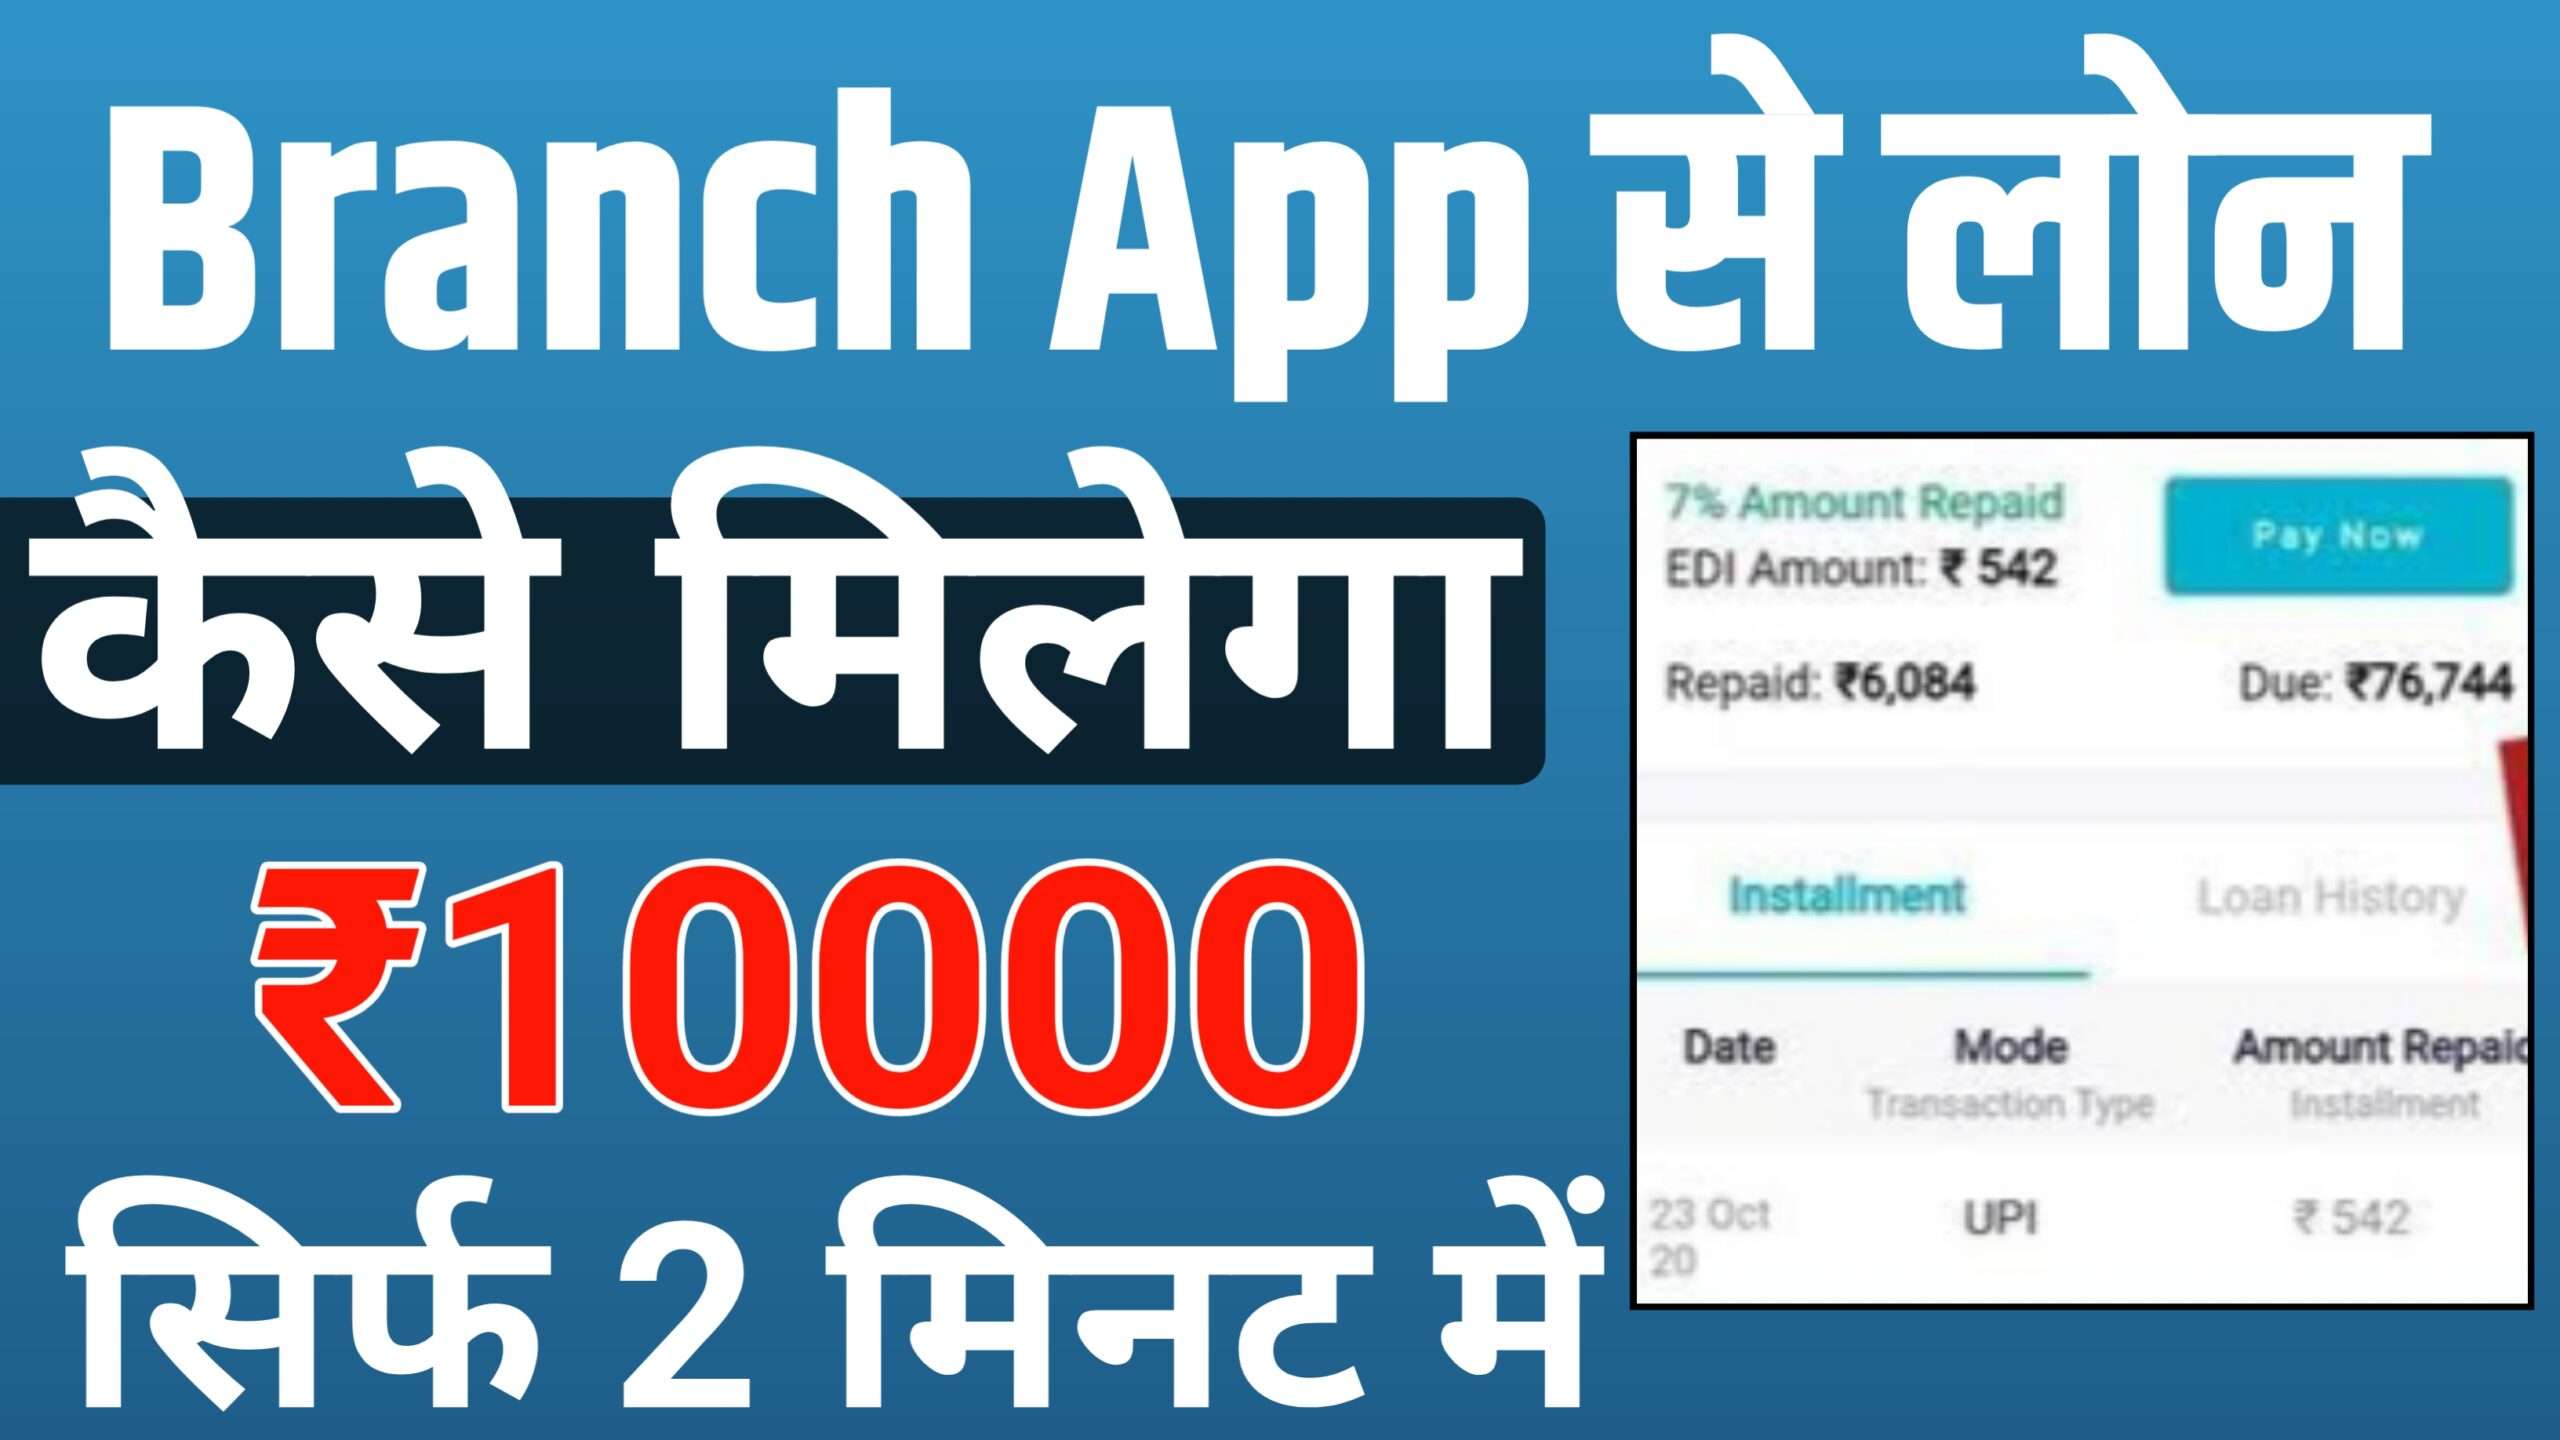 Branch App Gives Personal Loan Within 5 Minutes